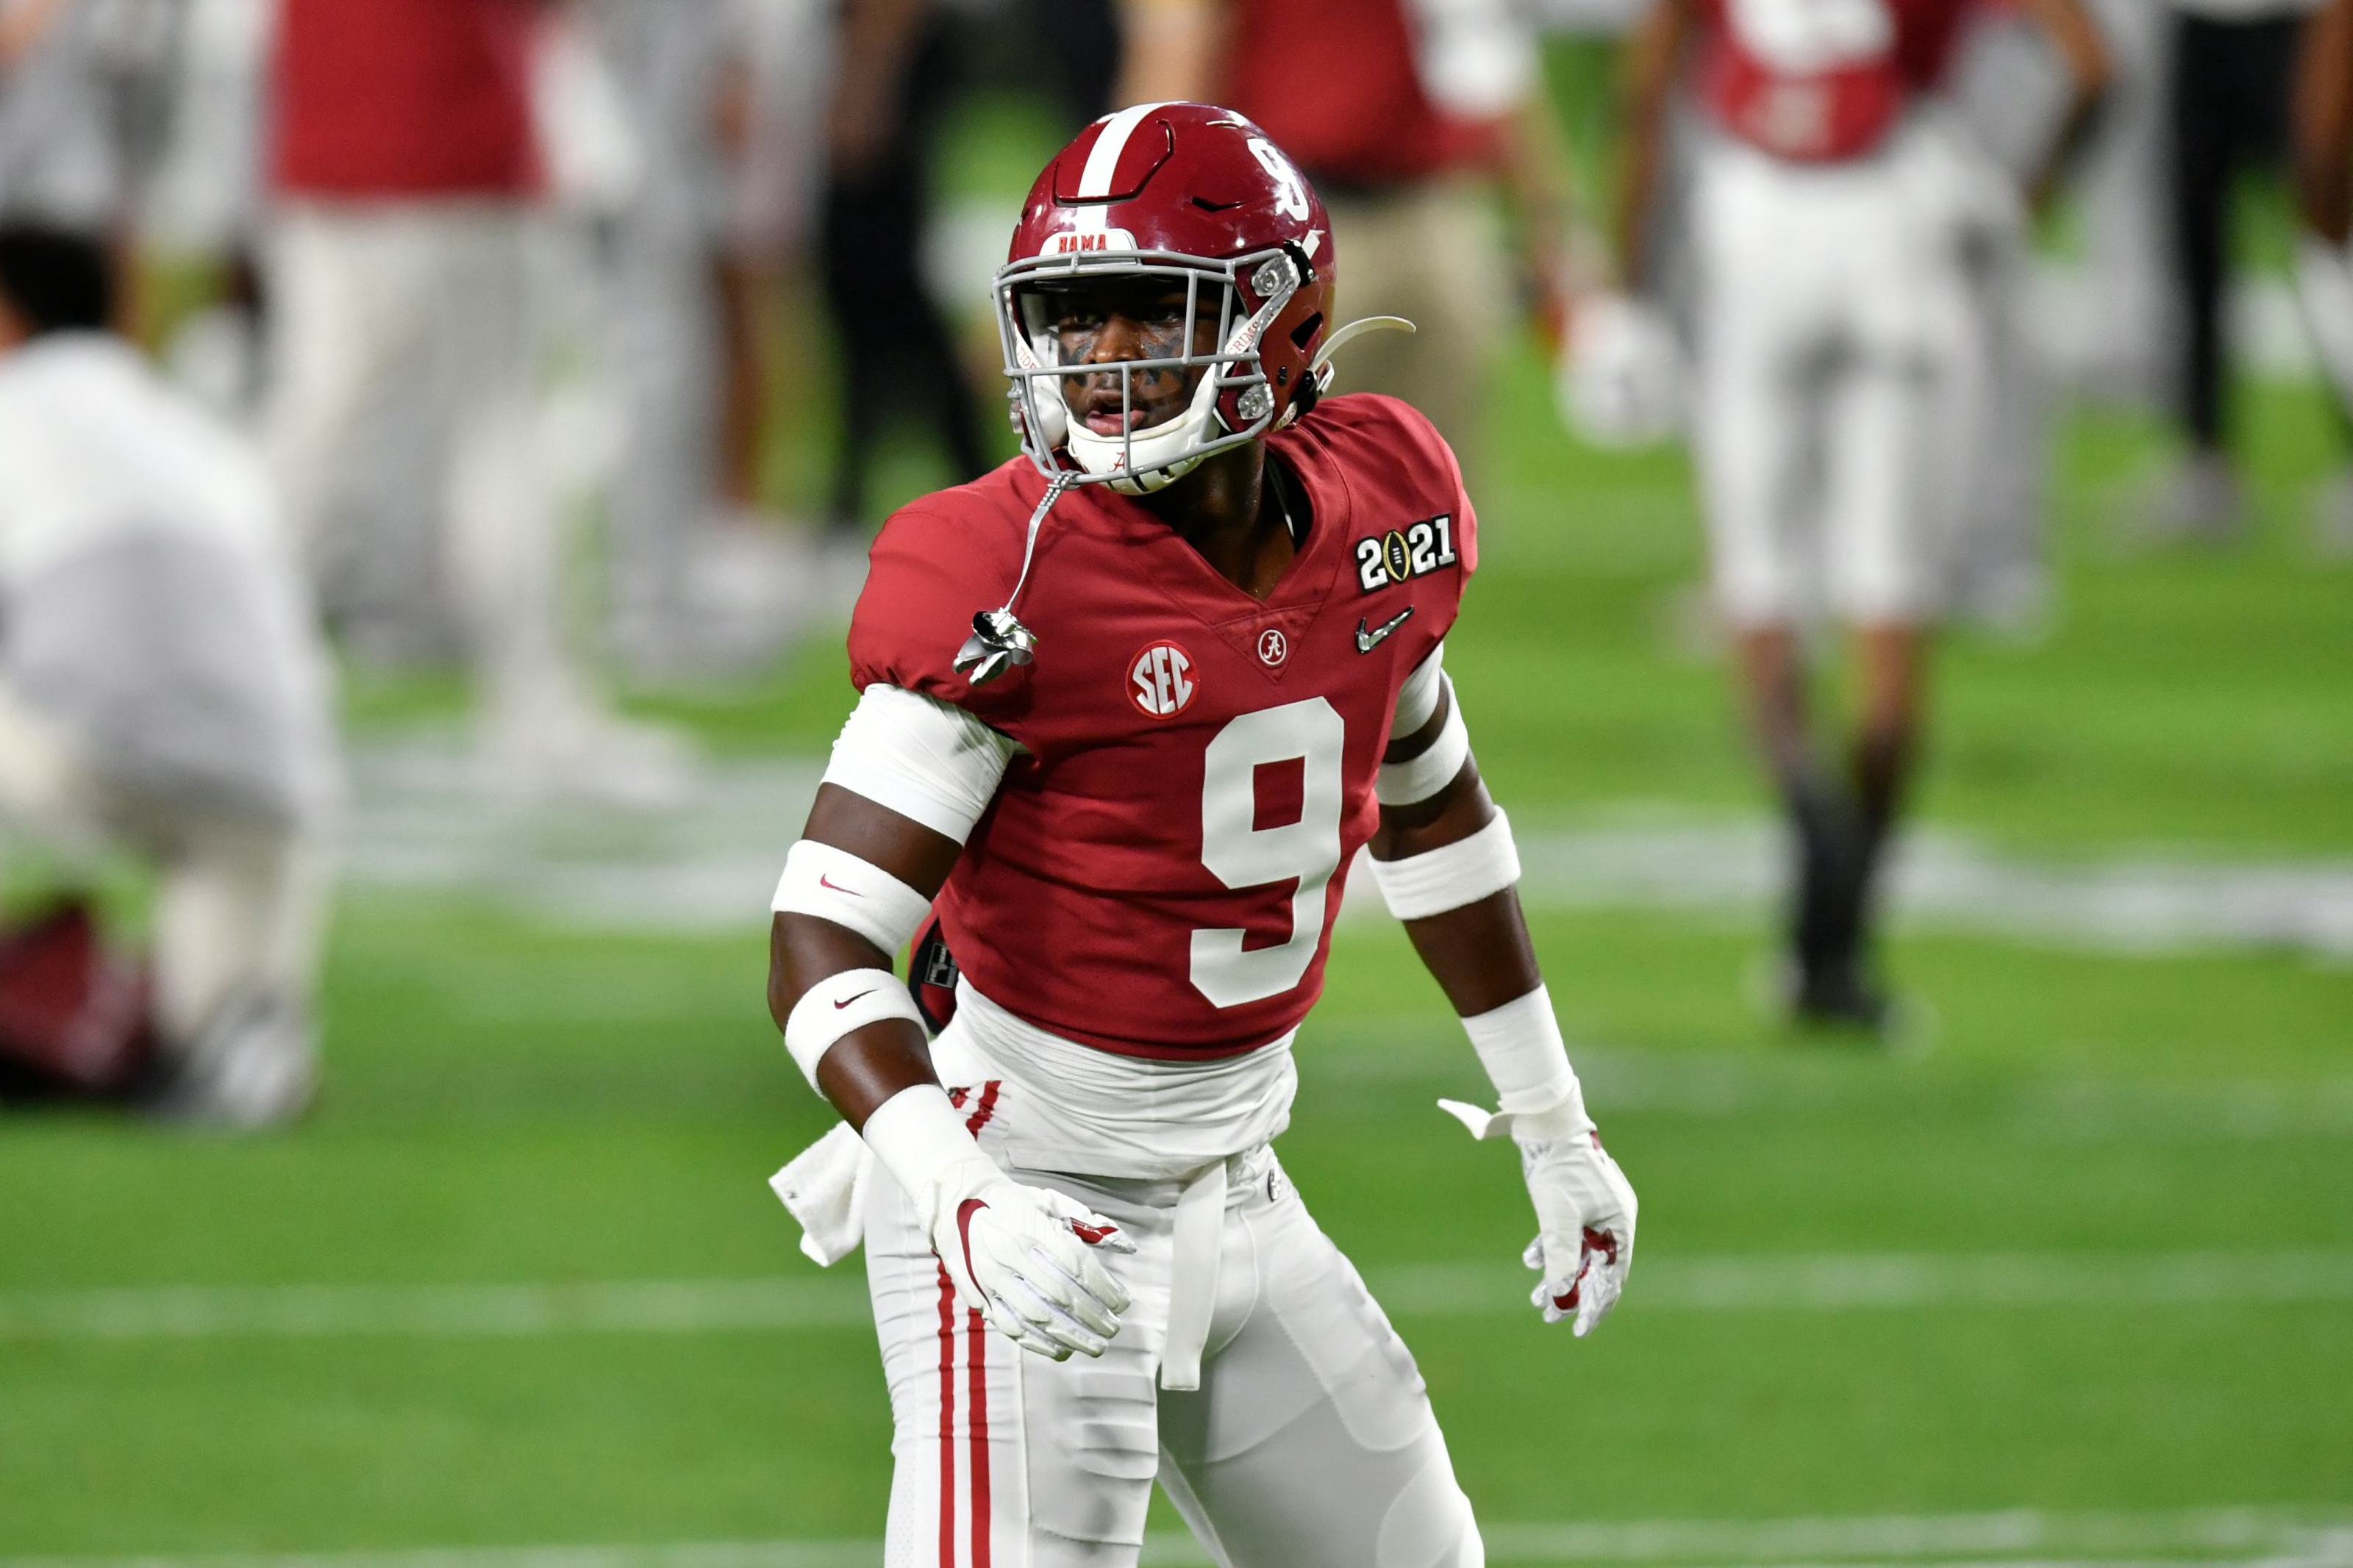 The Way-Too-Early 2023 NFL Mock Draft: Will the Vikings Take Their